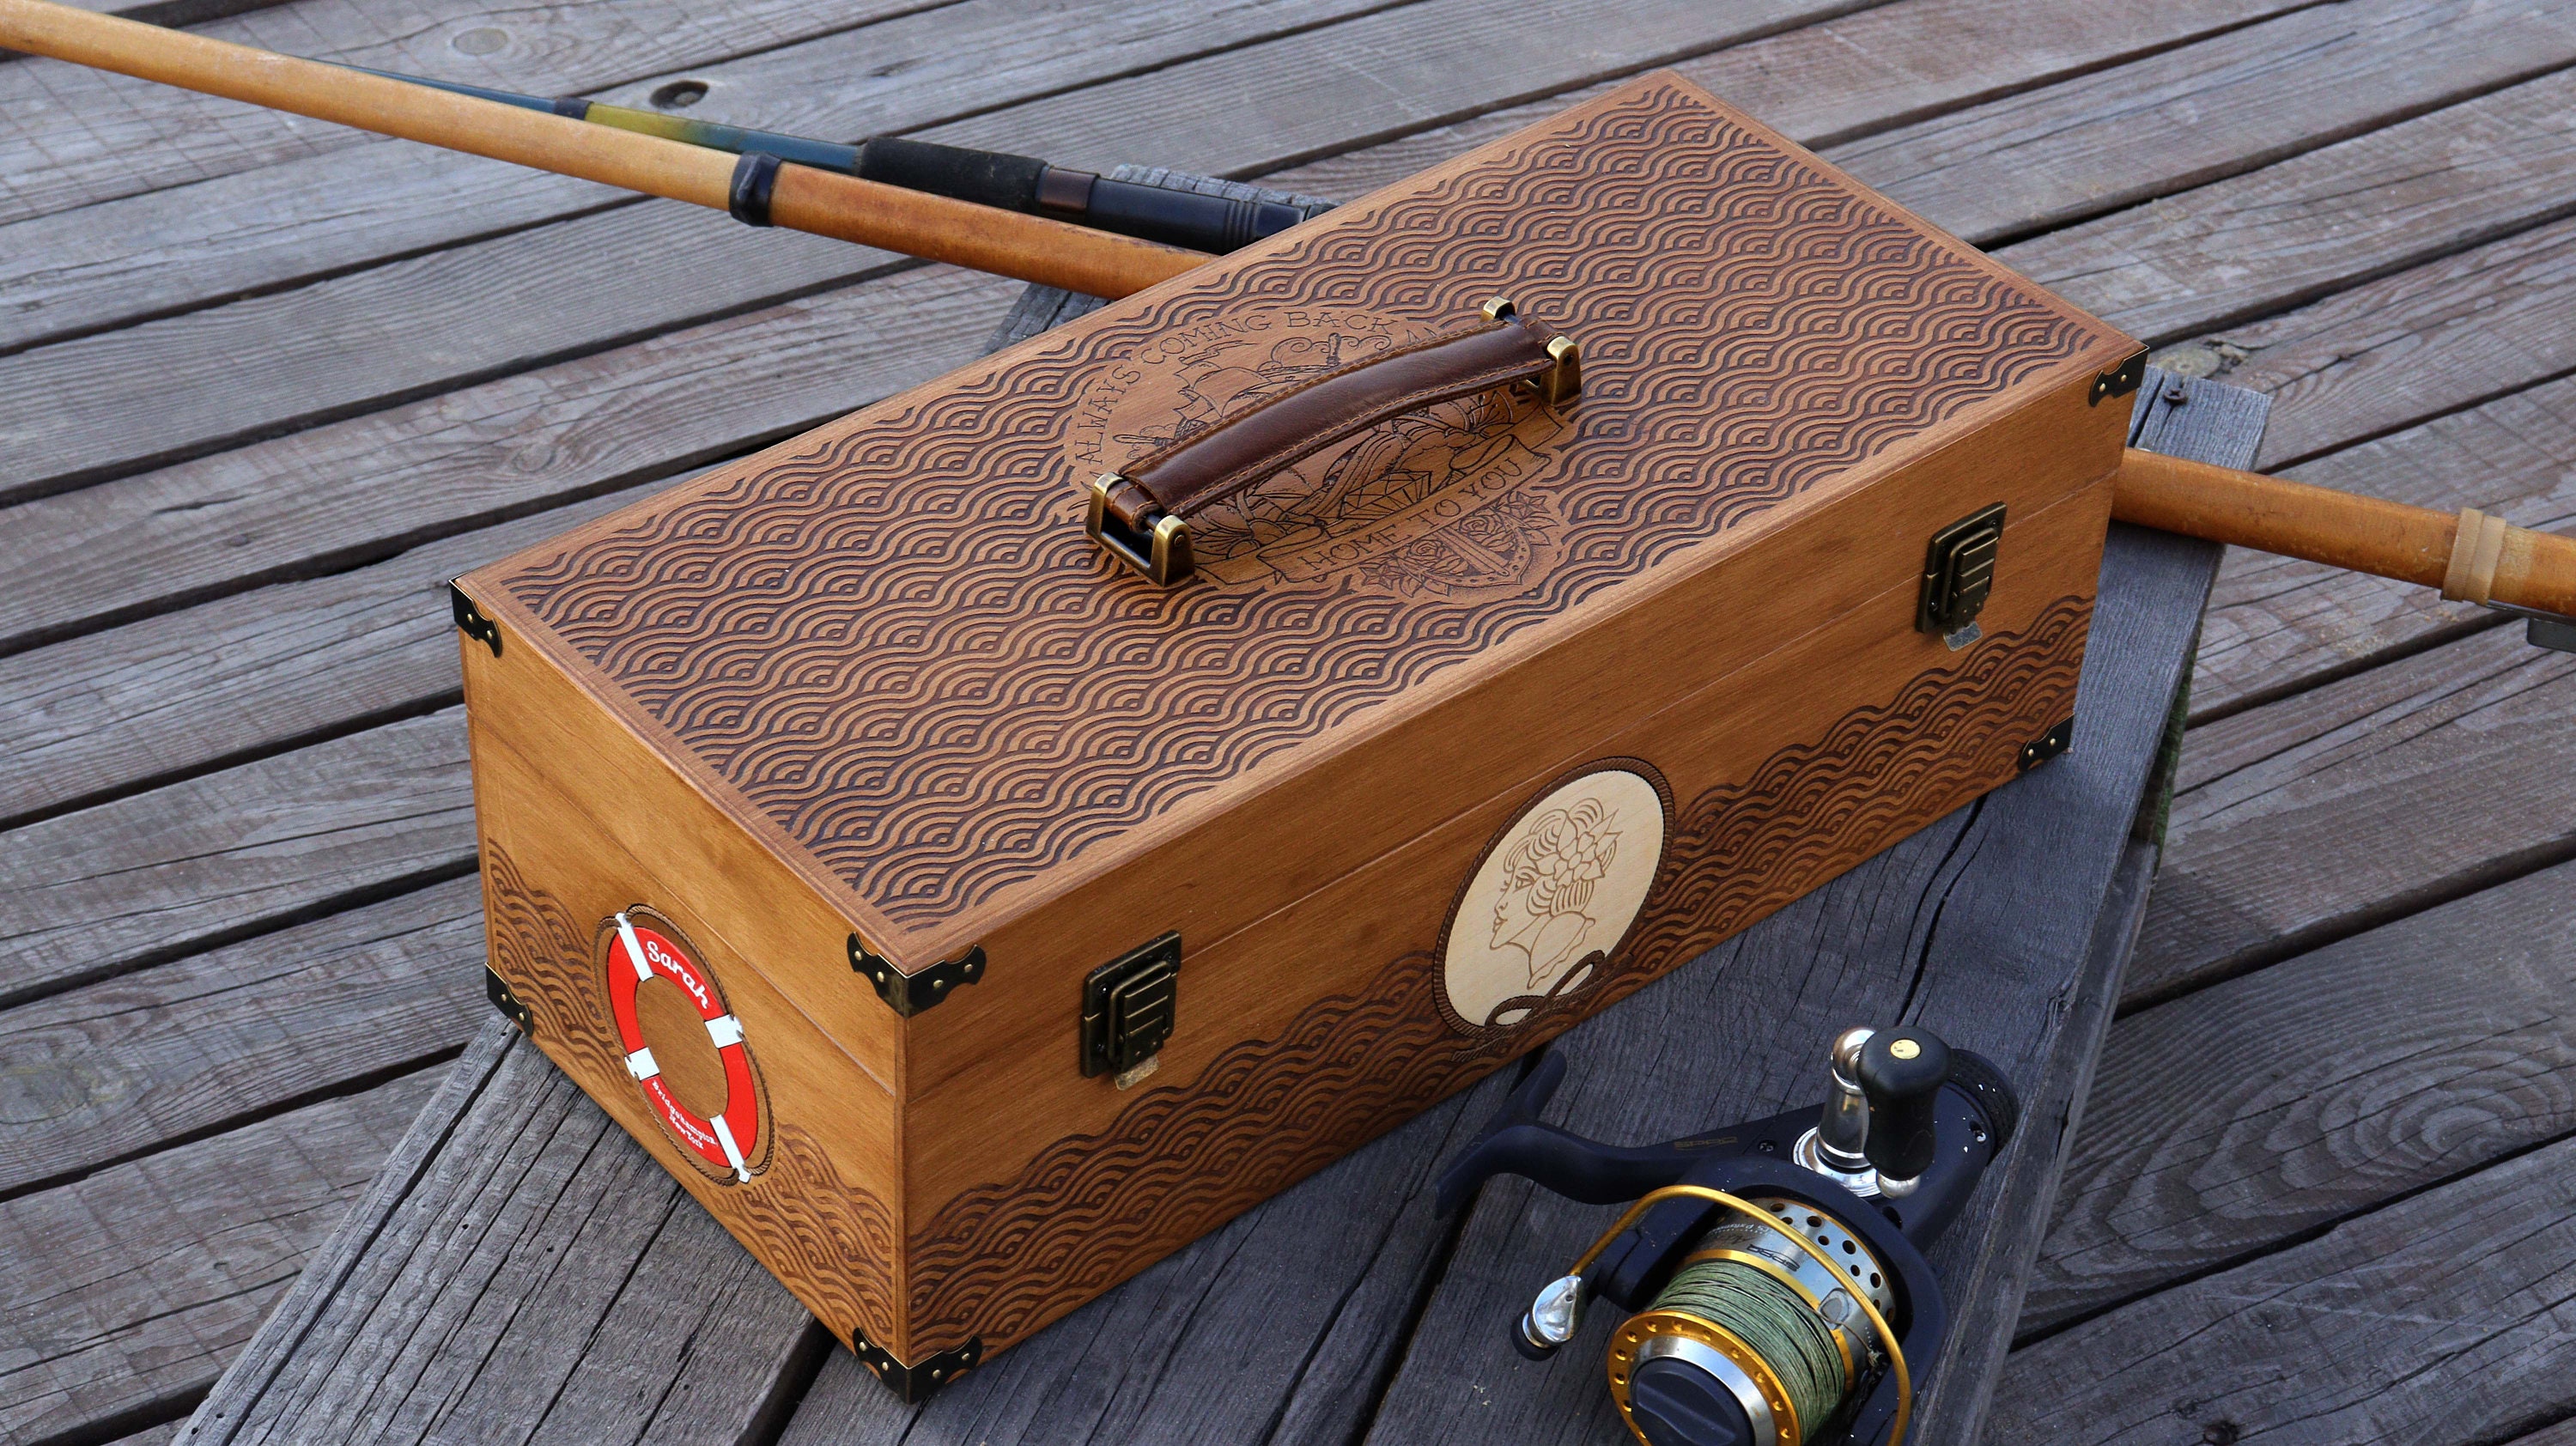 Marine Tackle Box, Customize Boat Box, Yacht and Boat Accesories